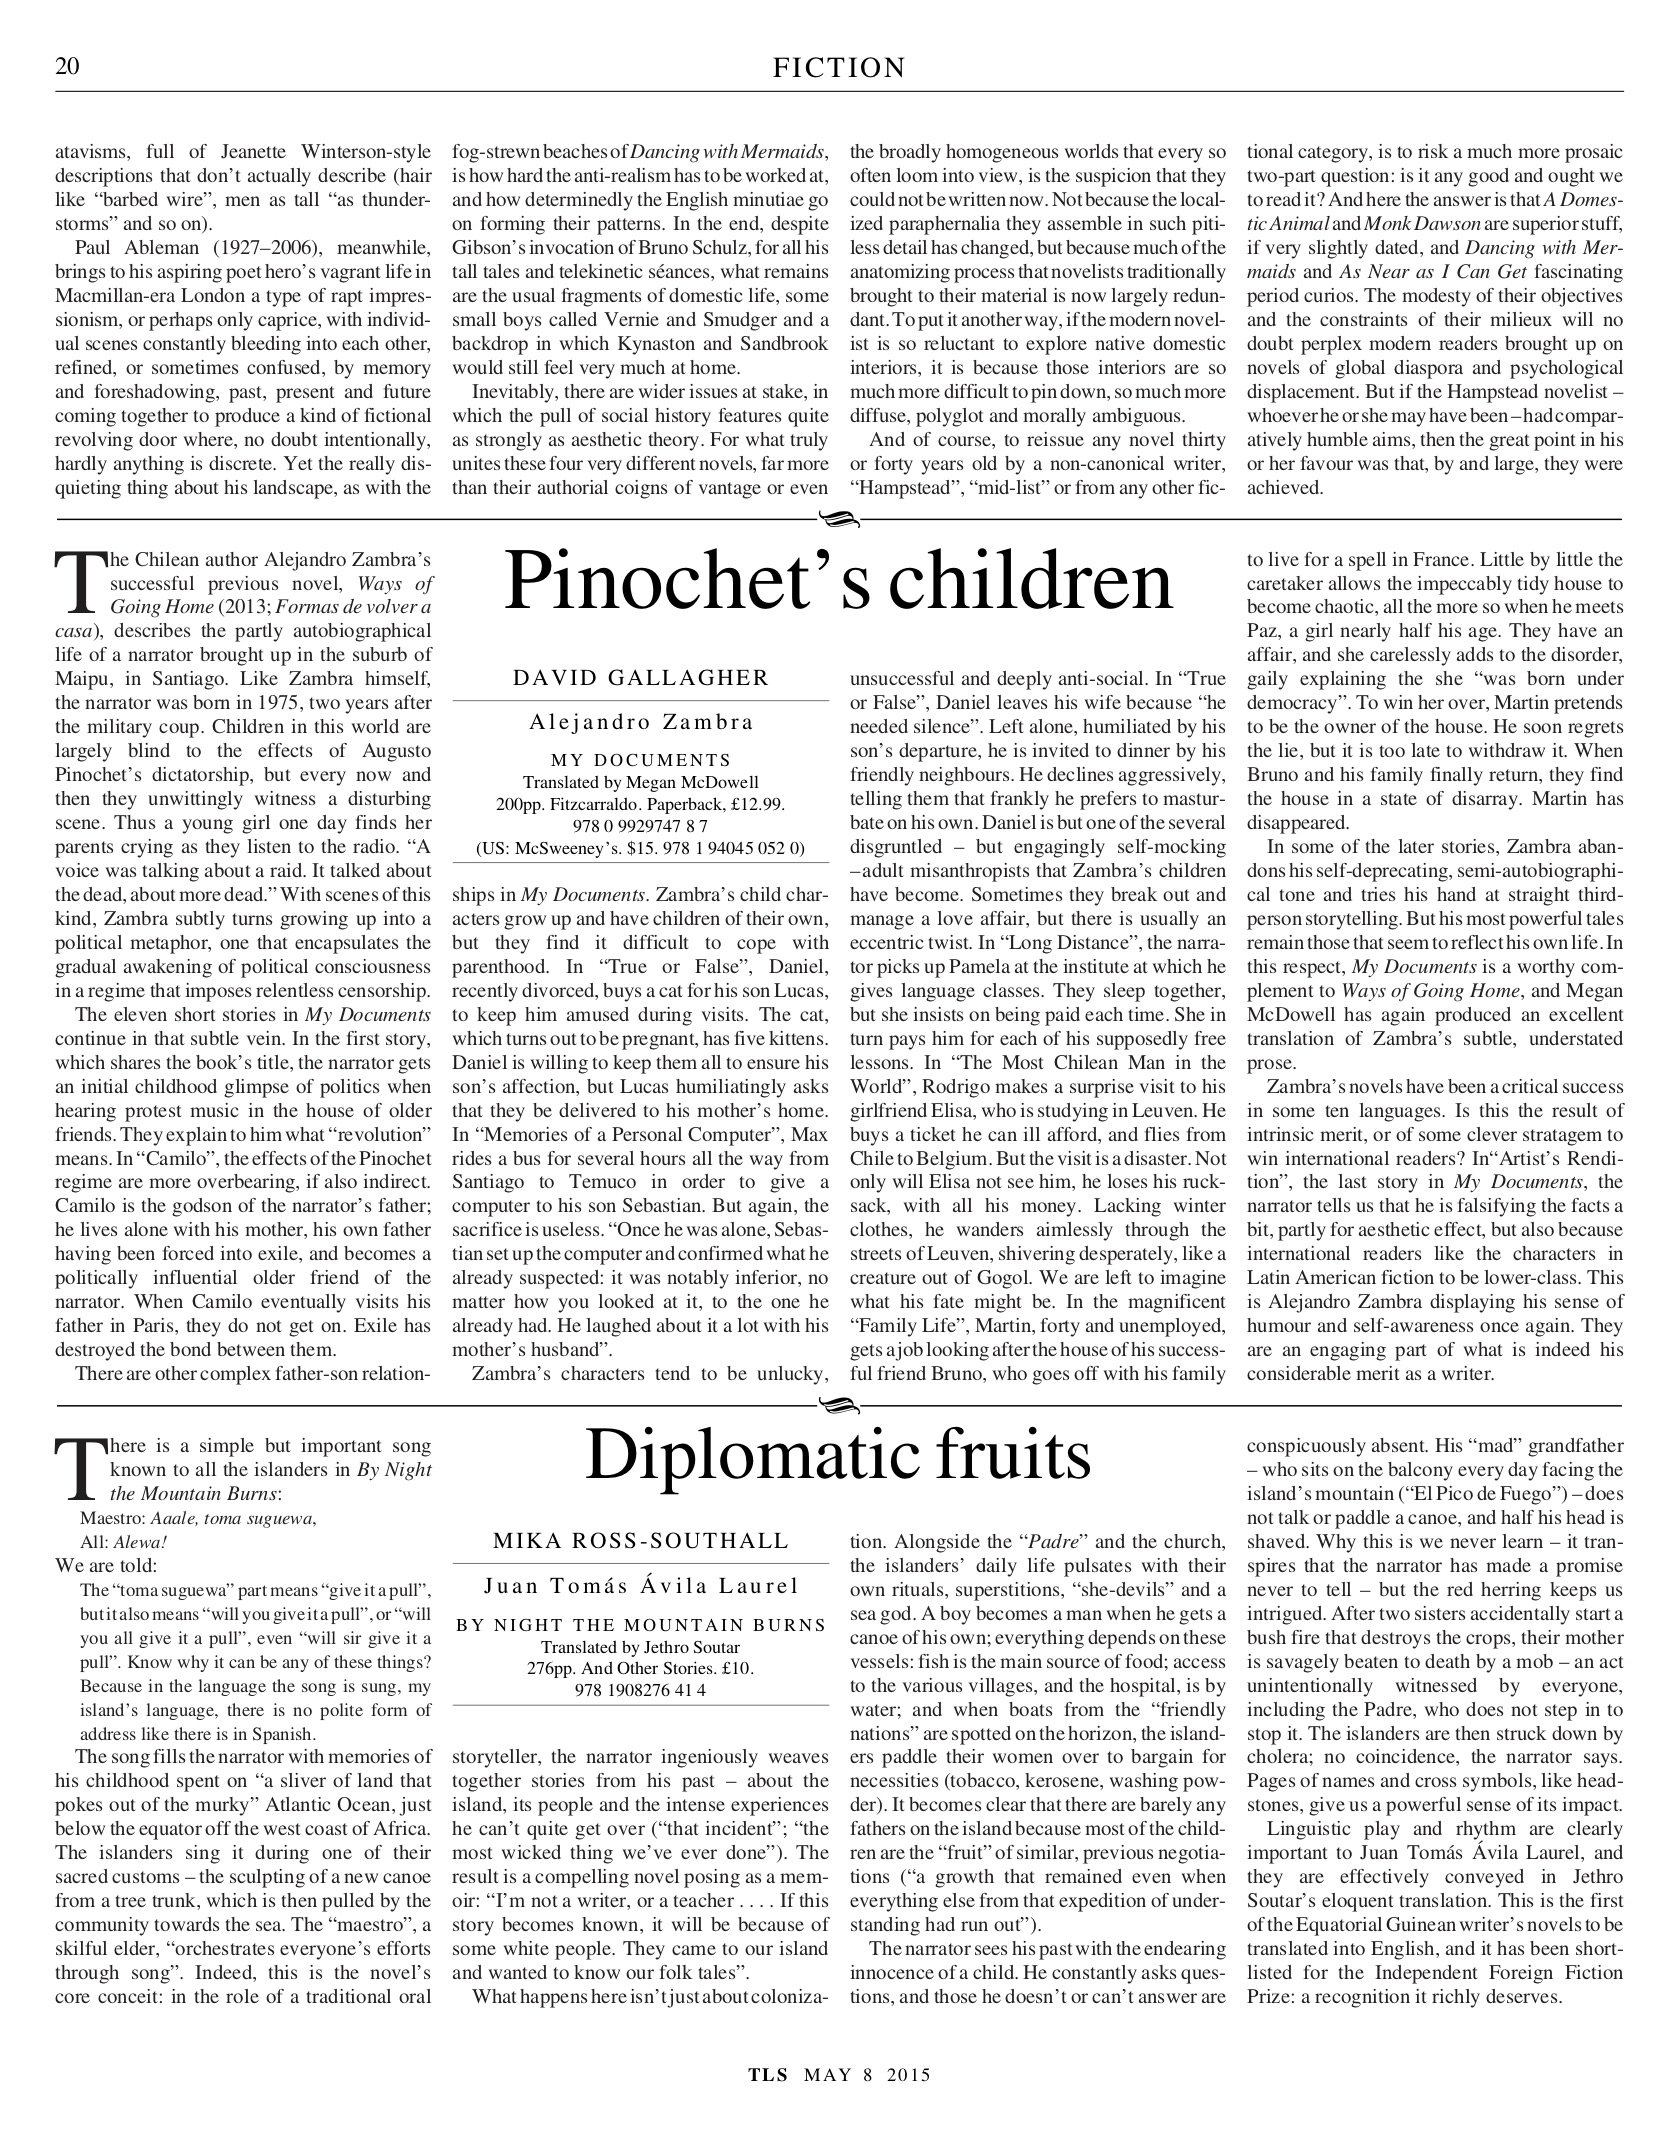 The Times Literary Supplement, 8 May 2015. "Diplomatic fruit"